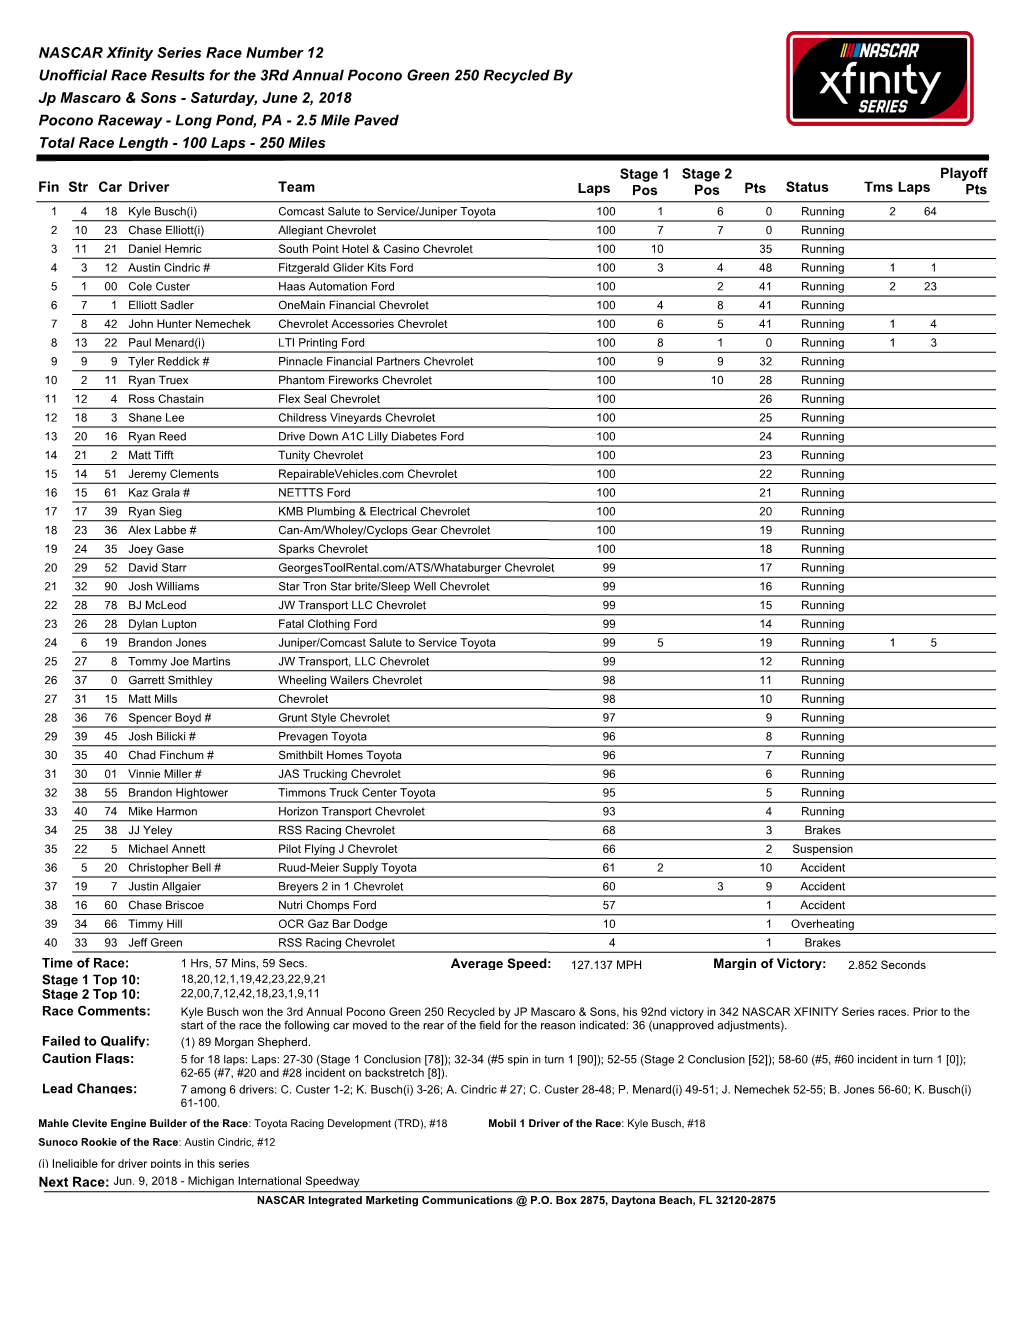 NASCAR Xfinity Series Race Number 12 Unofficial Race Results for The